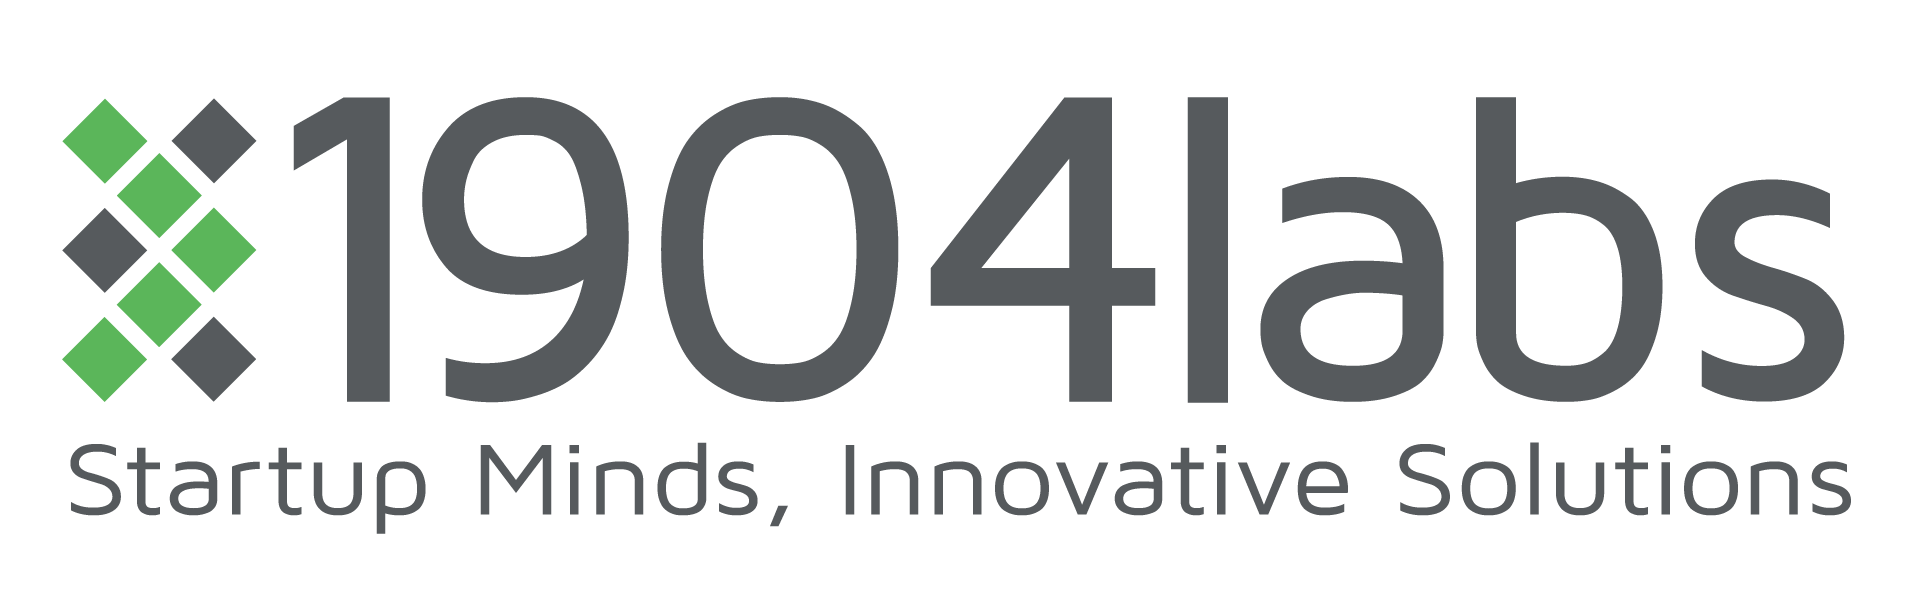 1904labs Startup Minds, Innovative Solutions